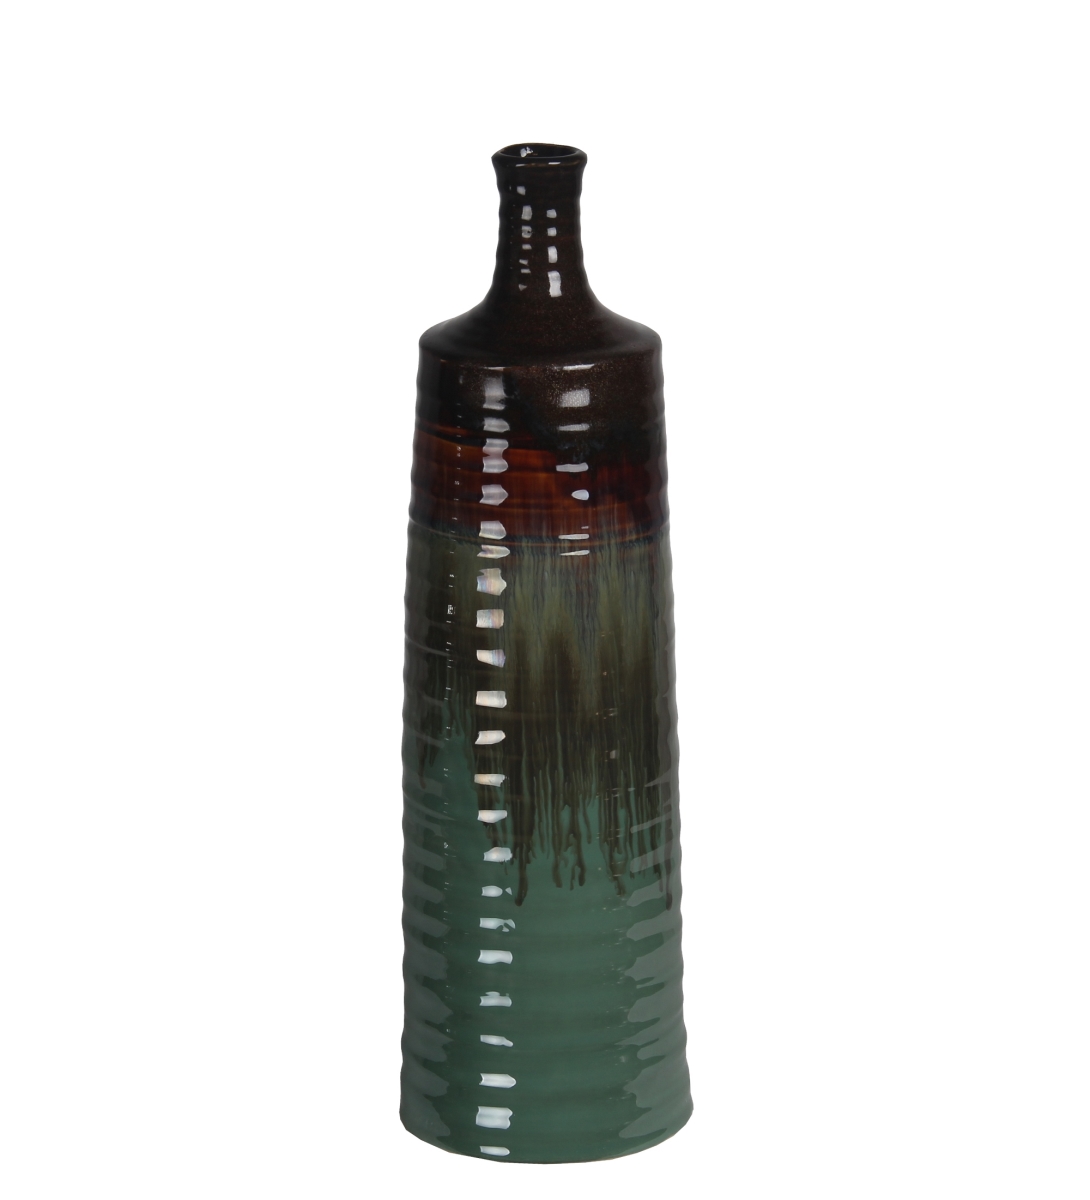 78208 6 X 6 X 18 In. Contemporary Ceramic Vase, Turquoise & Brown - Large